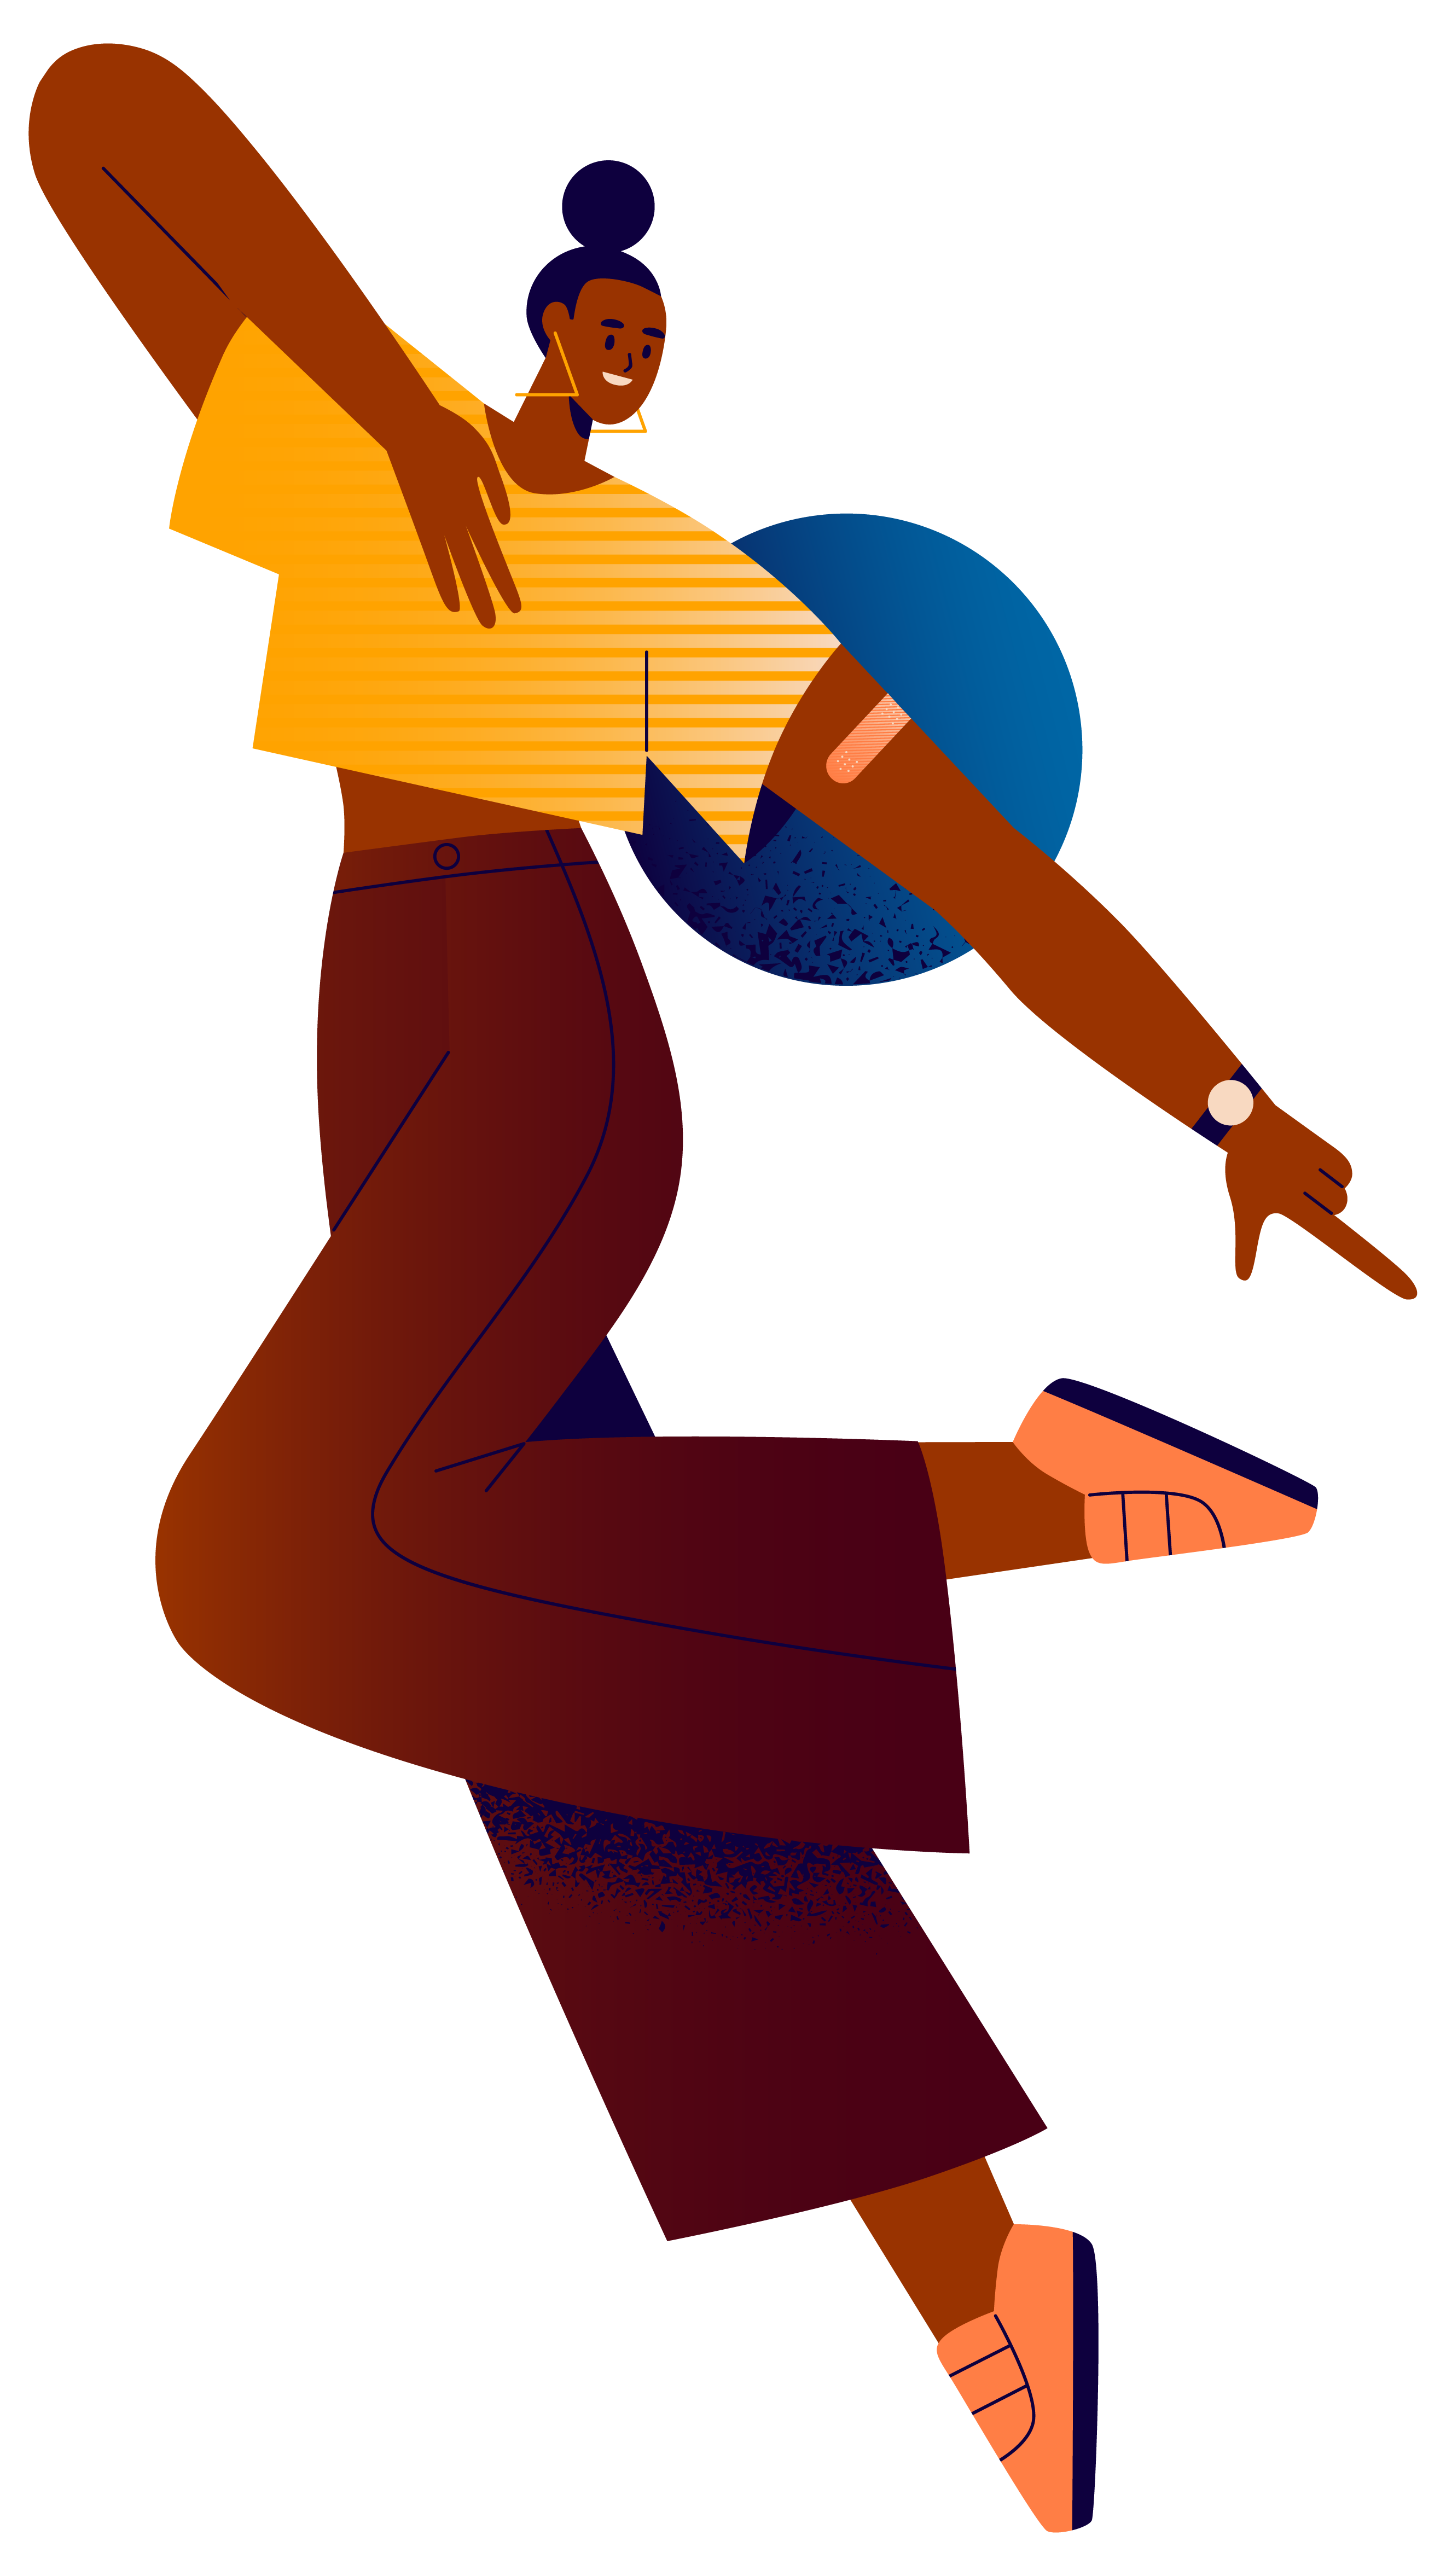 Stylized illustration of a person walking and showing a bandage on their arm